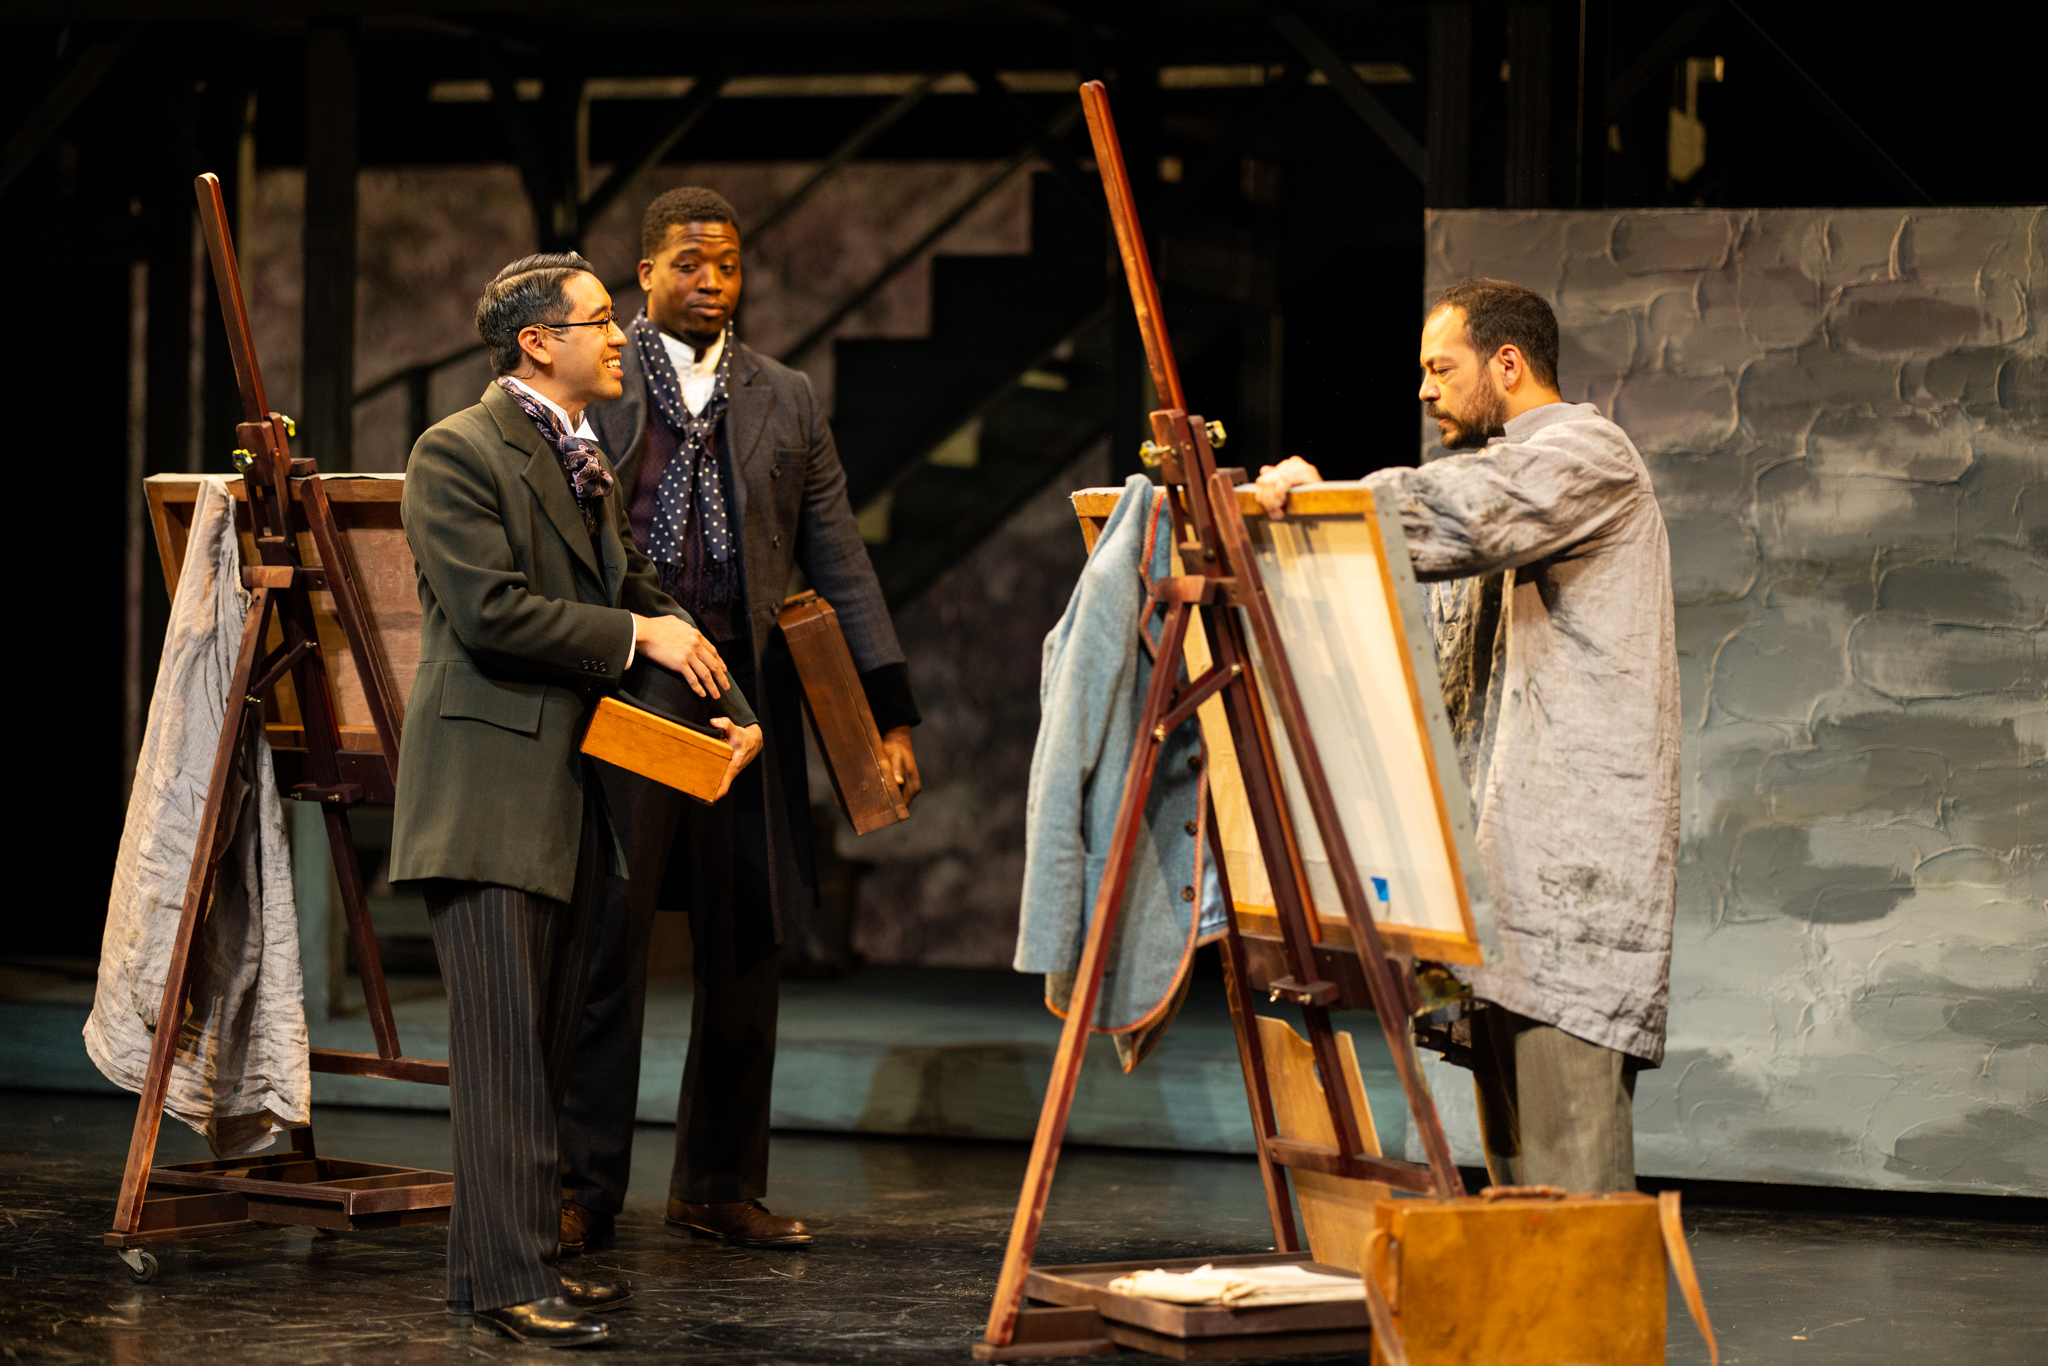 L-R: Alton Alburo as “Henri,” DeLeon Dallas as “ Bernard” and Paco Tolson as “Vincent” in La Jolla Playhouse’s world-premiere production of TO THE YELLOW HOUSE, by Kimber Lee, directed by Neel Keller; photo by Rich Soublet II.